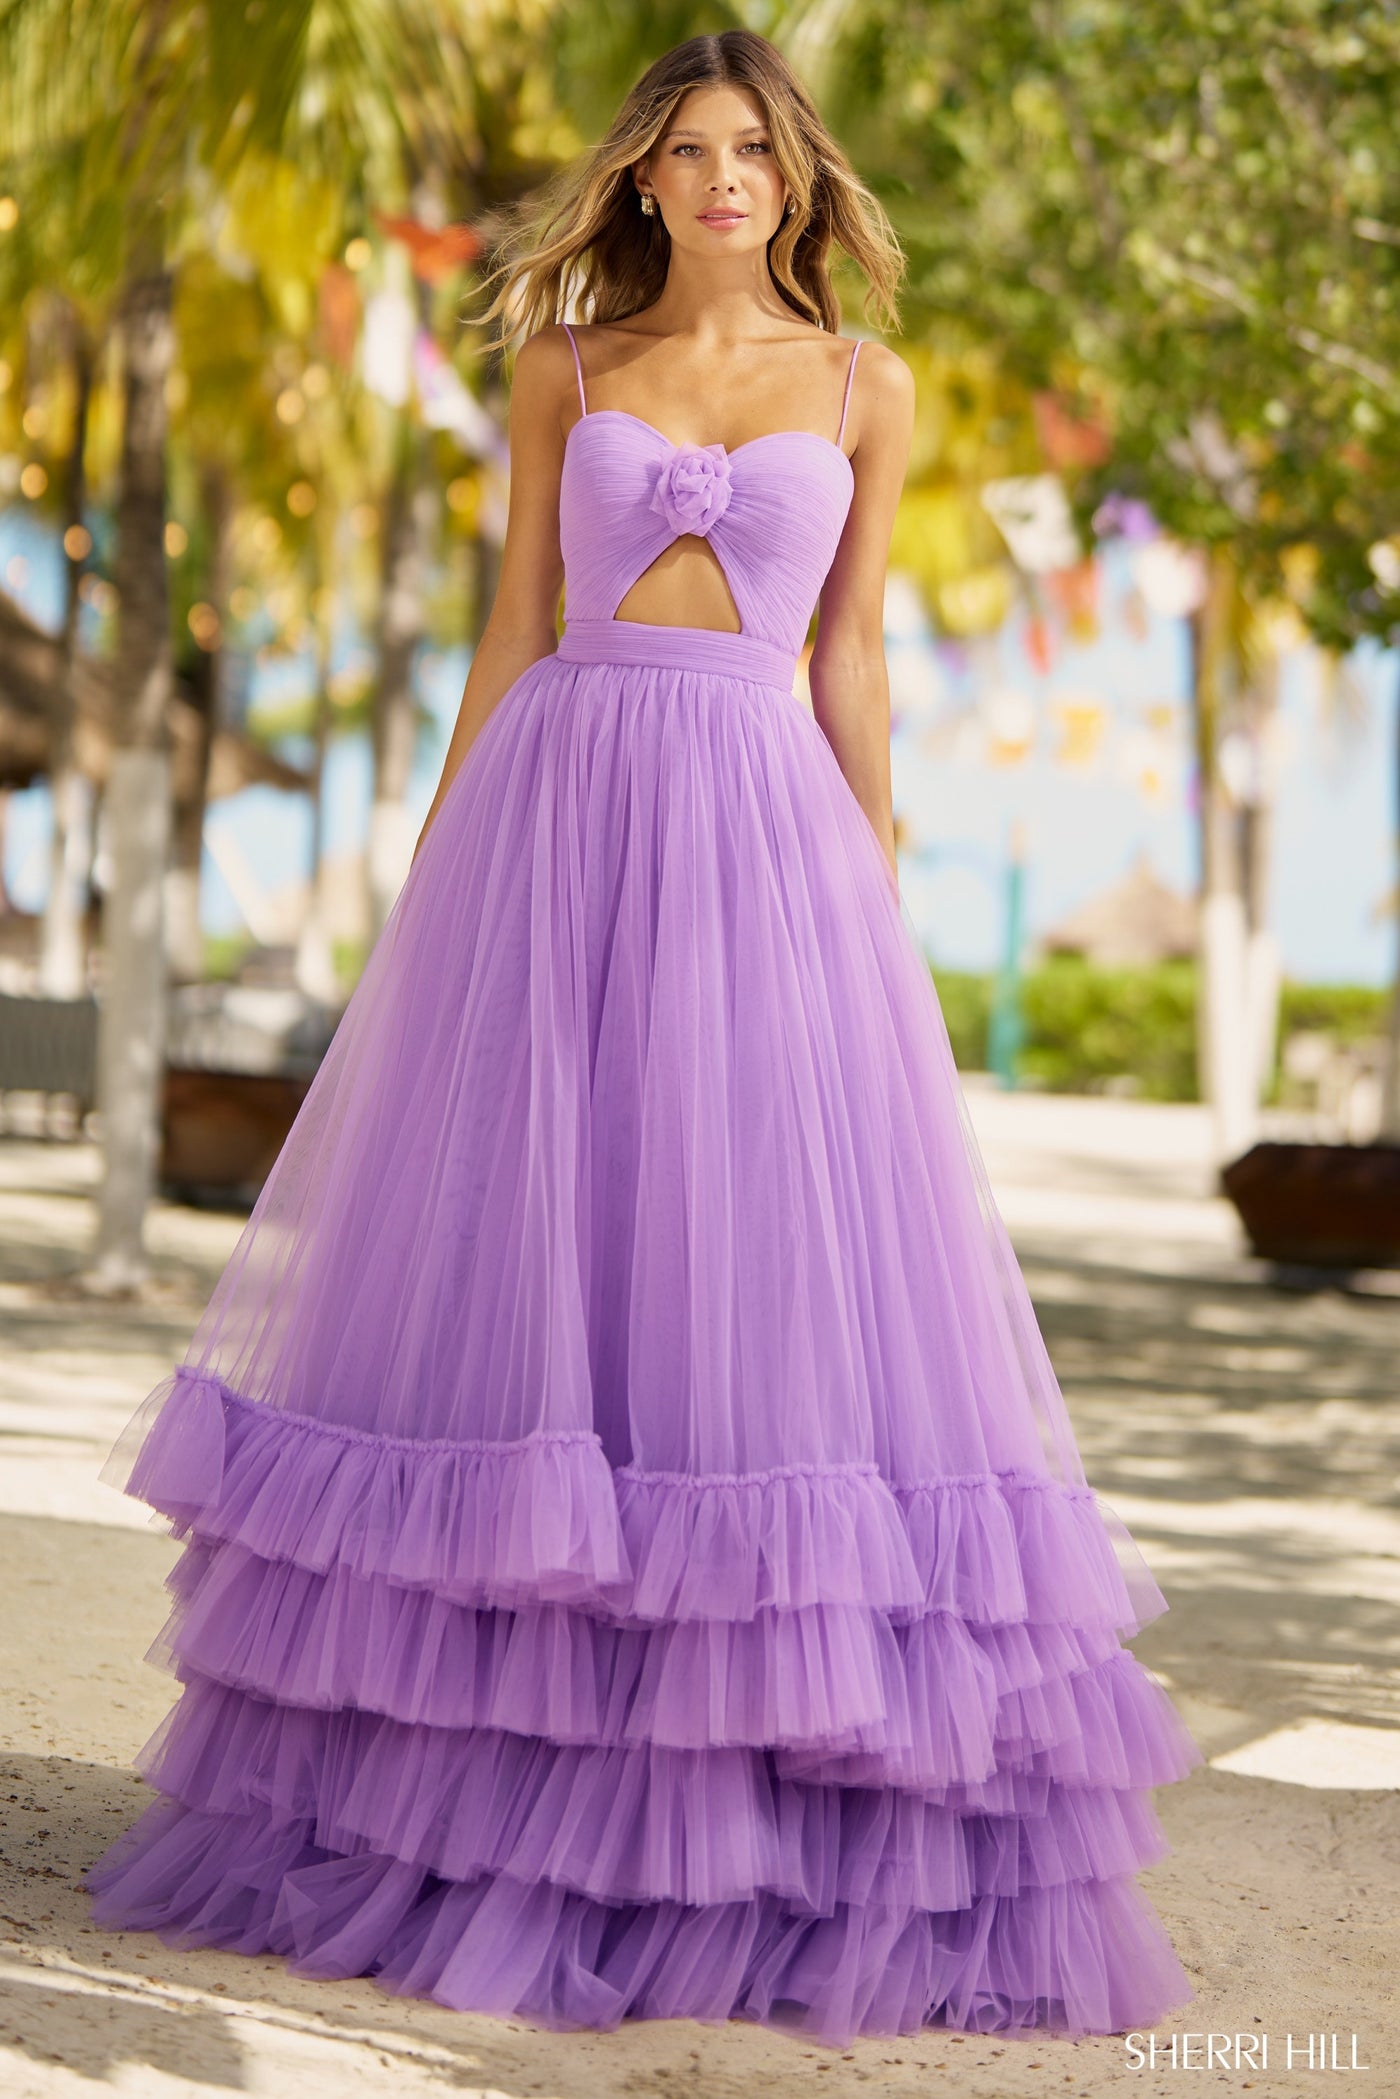 Sherri-Hill-55982-Sweetheart-Neckline-A-line-Gown-Tulle-Fabric-Lilac-Long-Dress-Evening-Gown-Prom-Dress-Sherri-Hill-2024